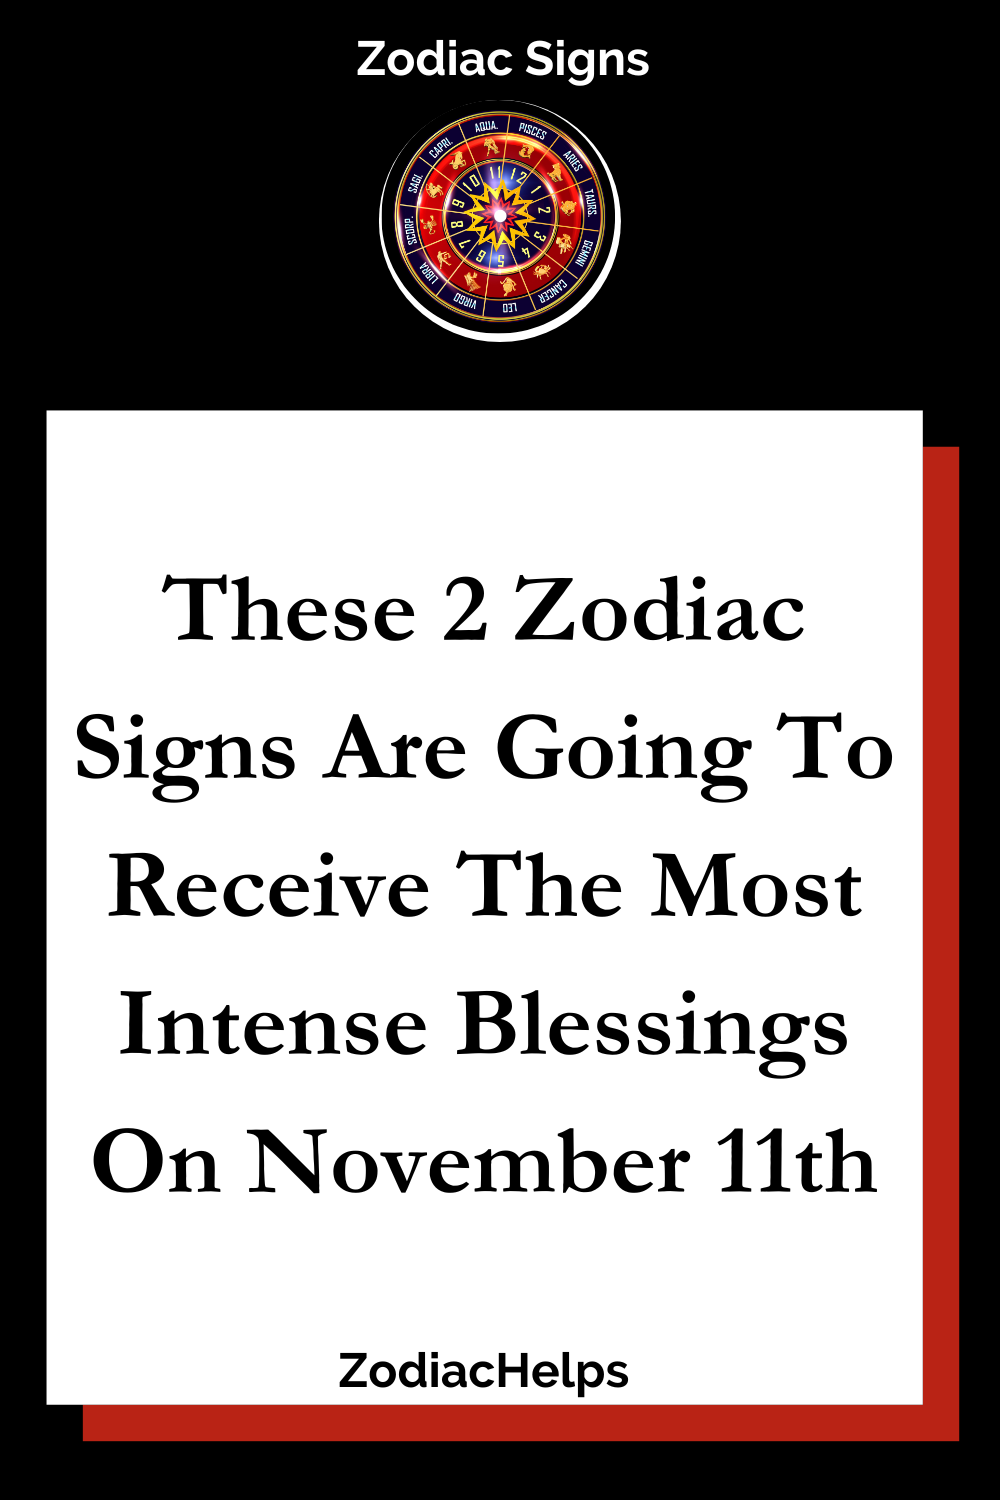 These 2 Zodiac Signs Are Going To Receive The Most Intense Blessings On November 11th